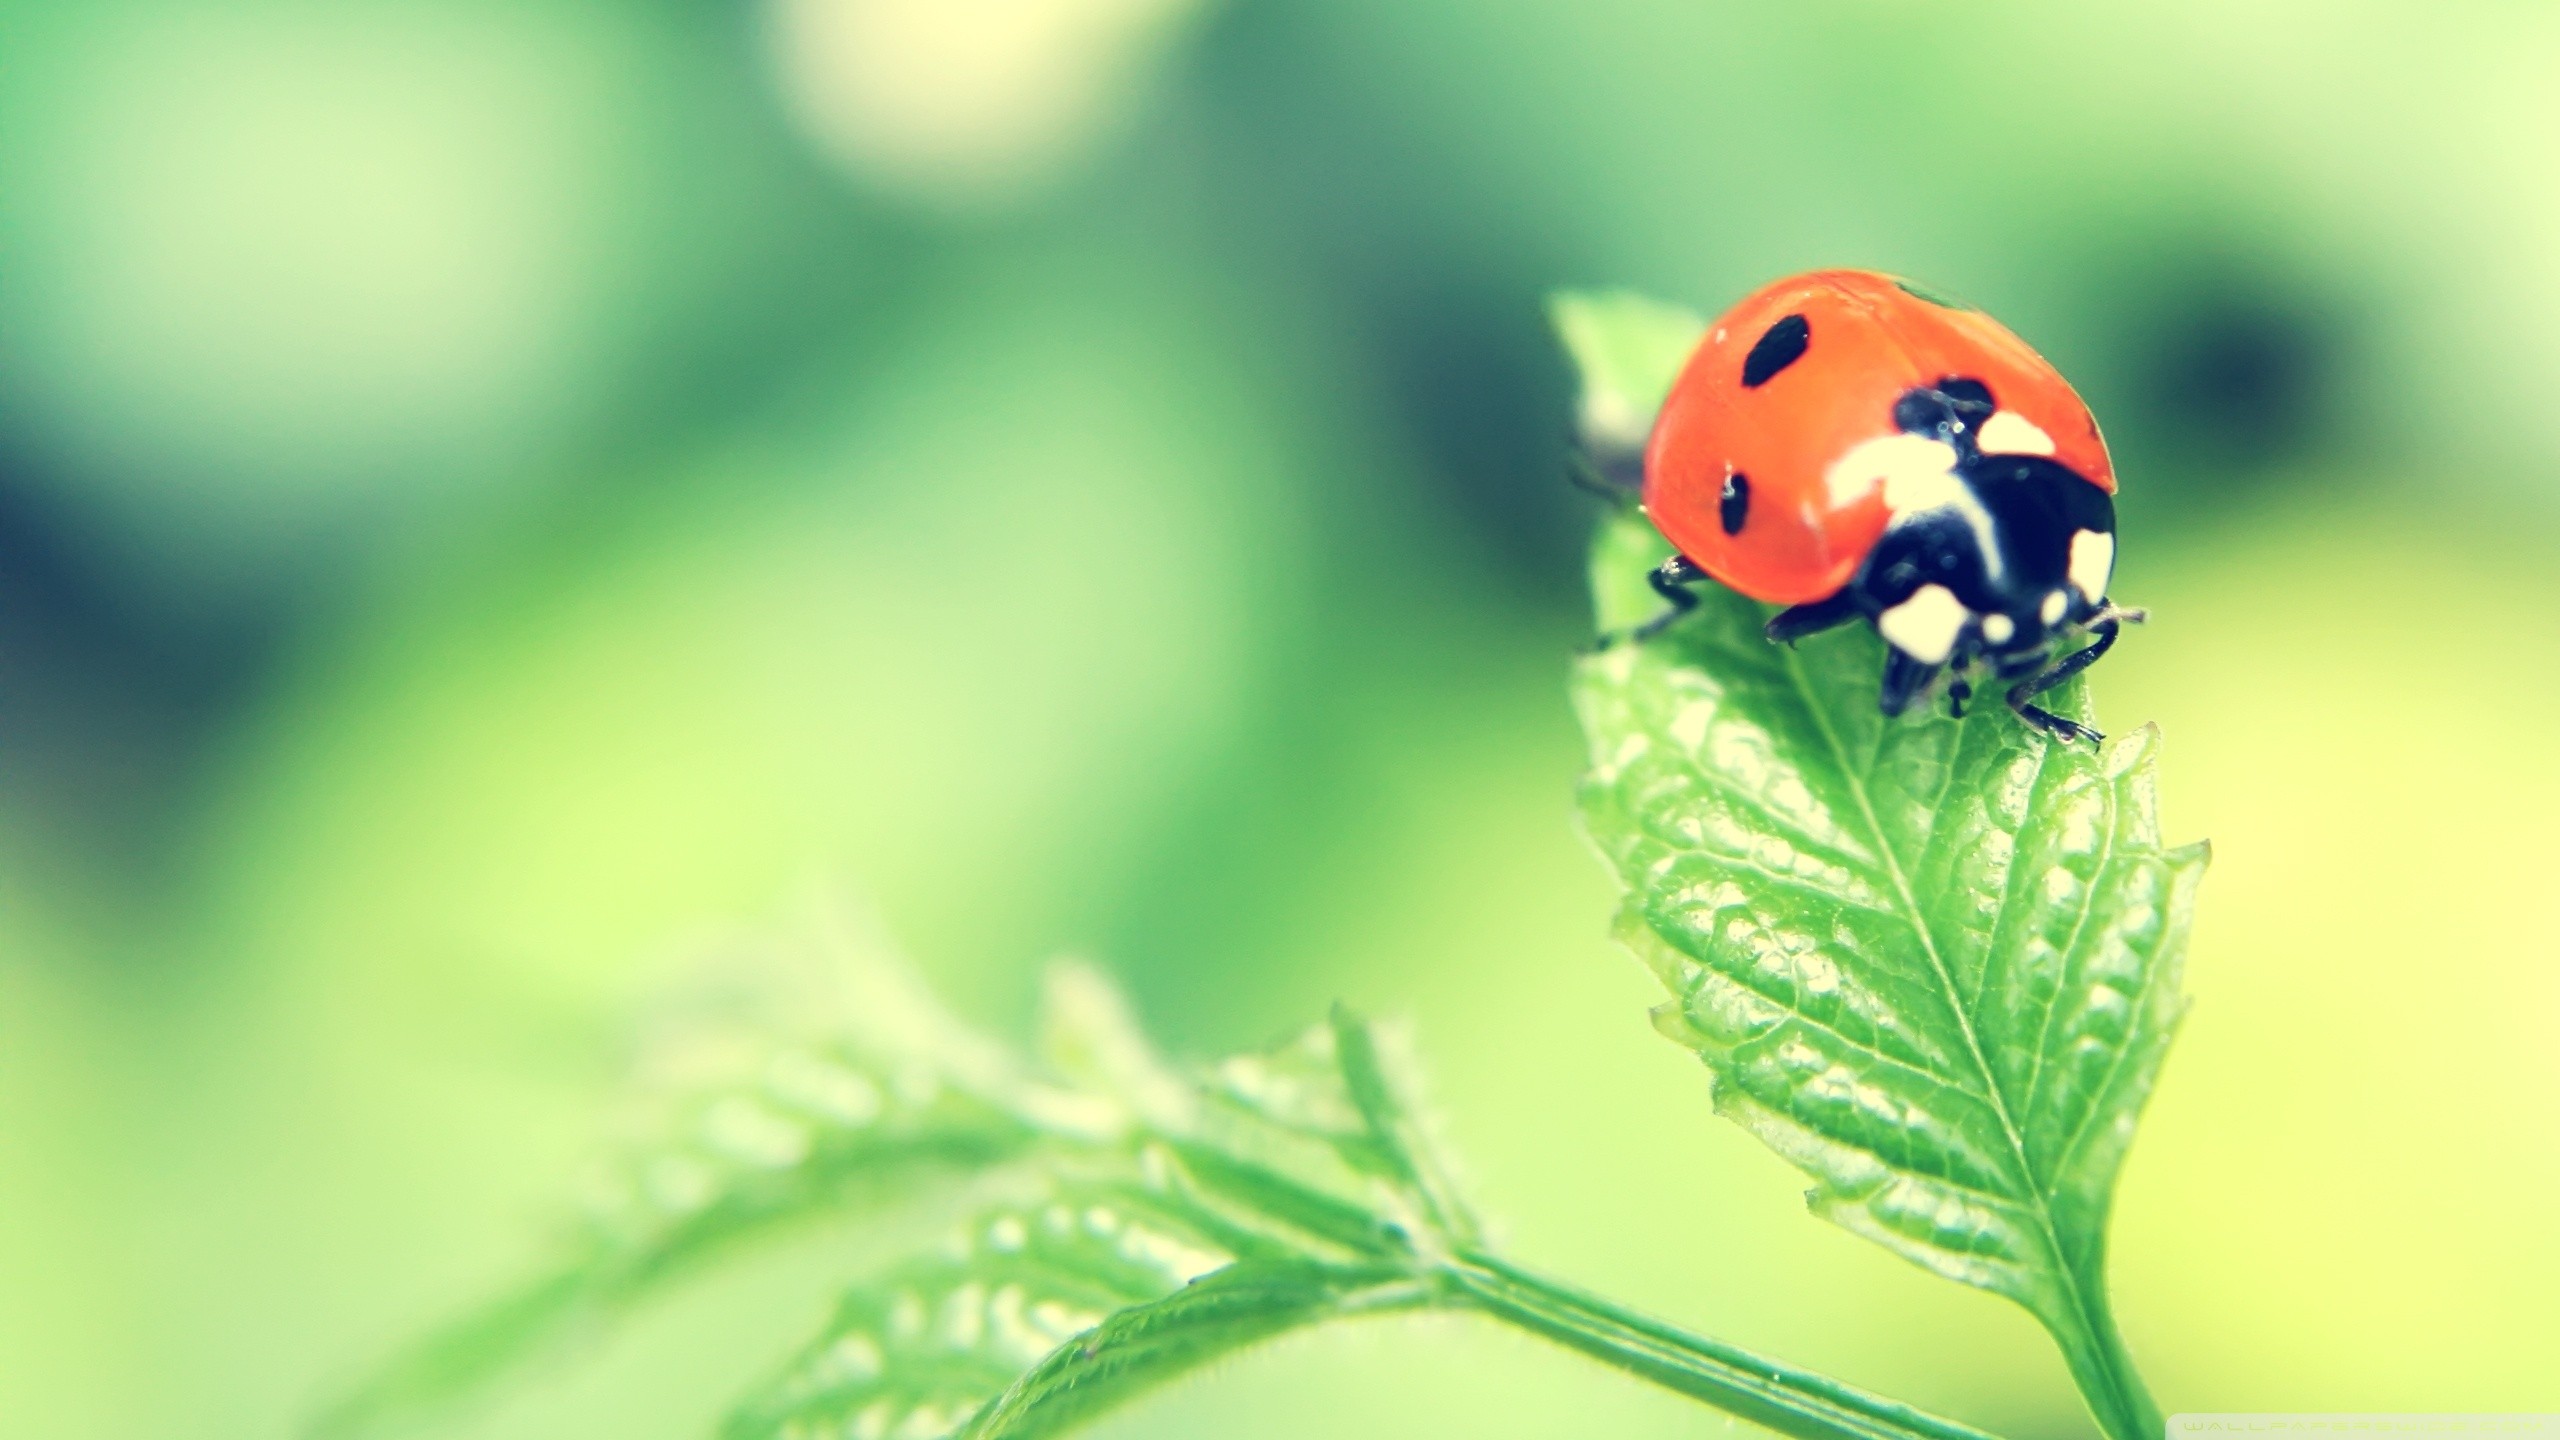 General 2560x1440 insect animals leaves plants